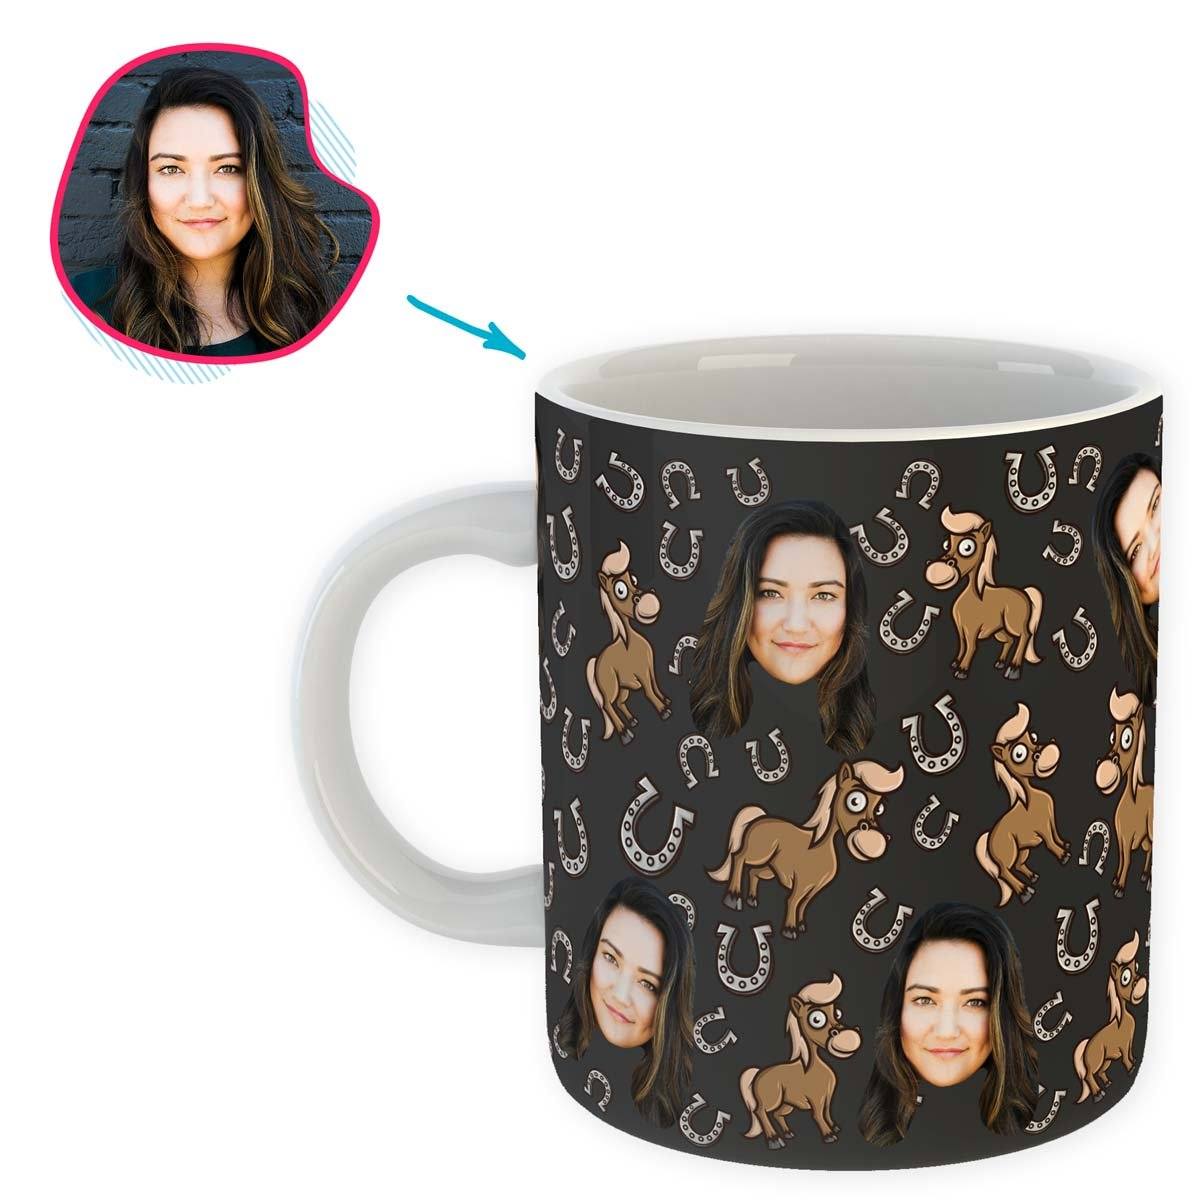 dark Horse mug personalized with photo of face printed on it